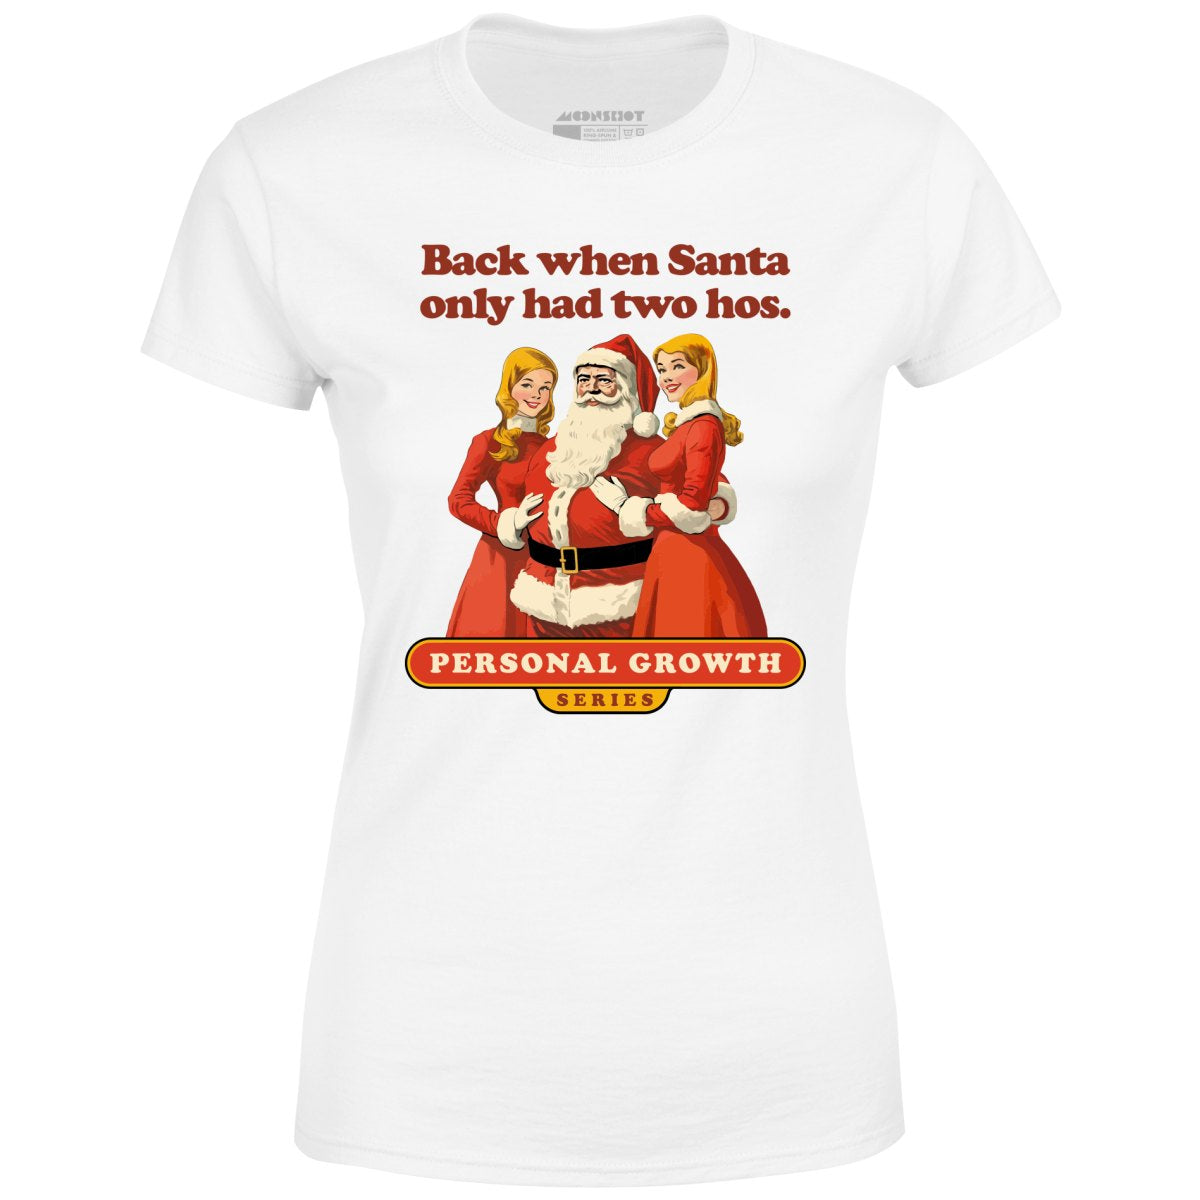 Back When Santa Only Had Two Hos - Women's T-Shirt